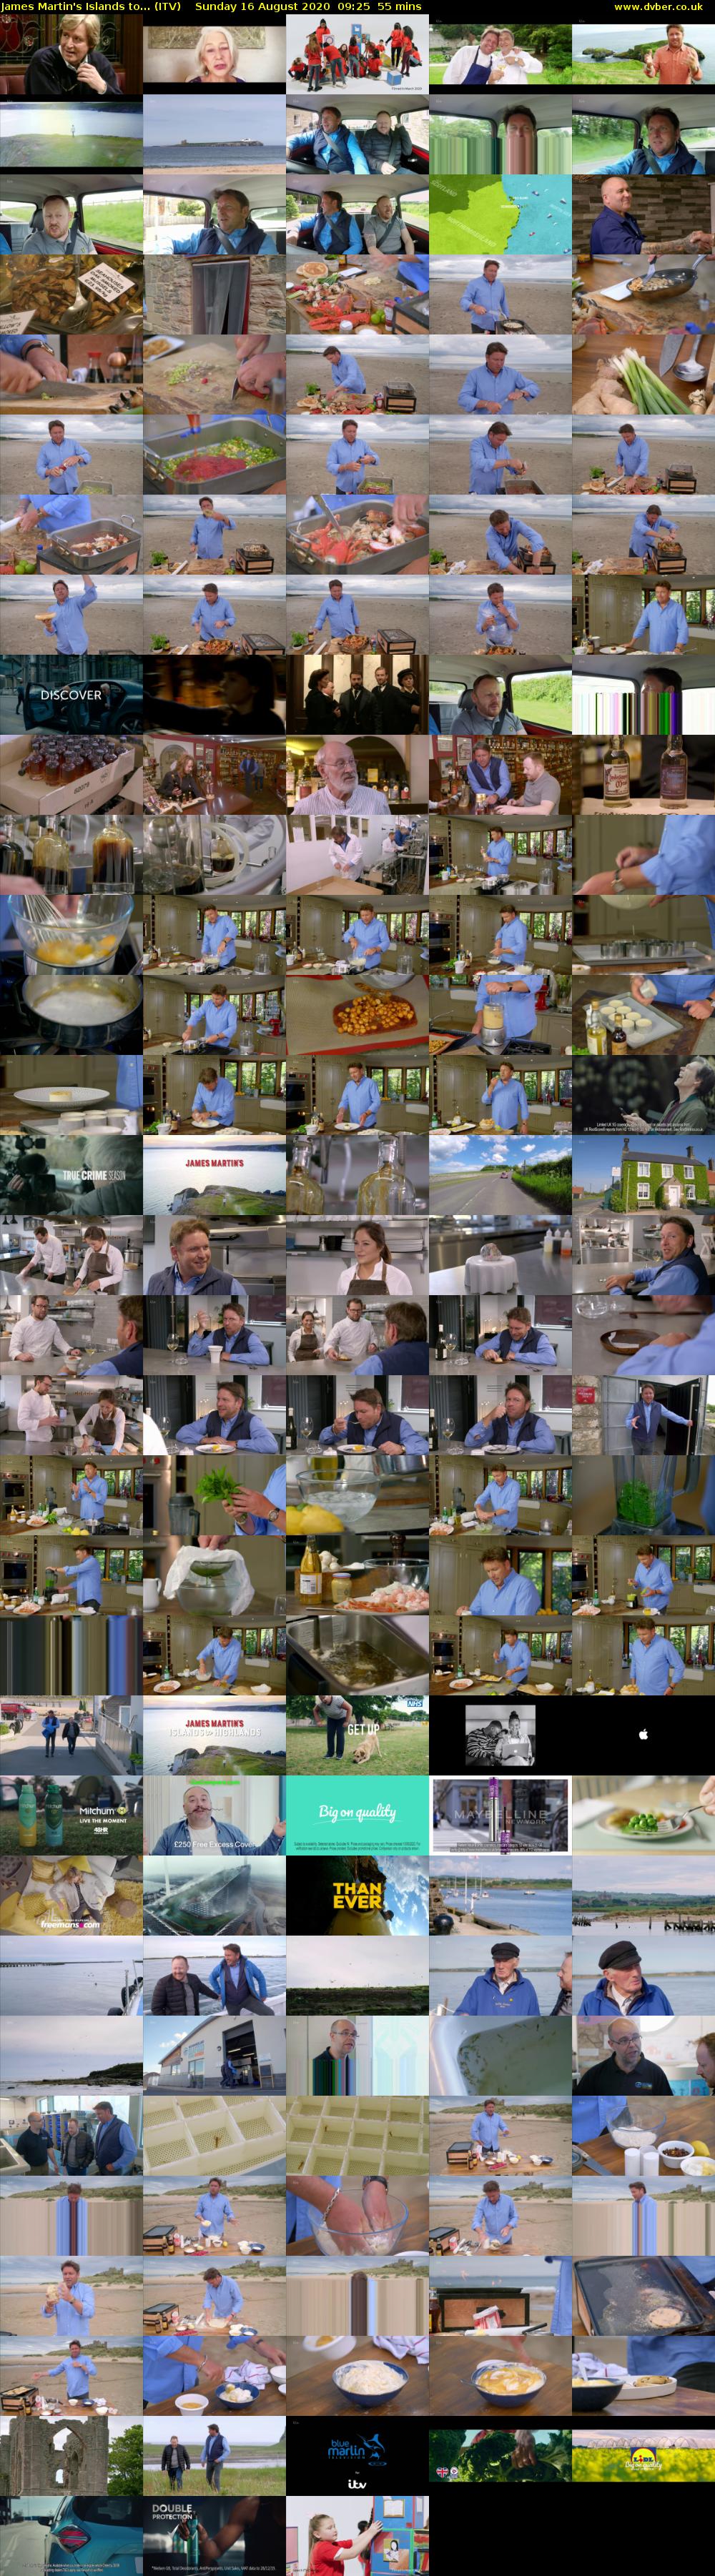 James Martin's Islands to... (ITV) Sunday 16 August 2020 09:25 - 10:20